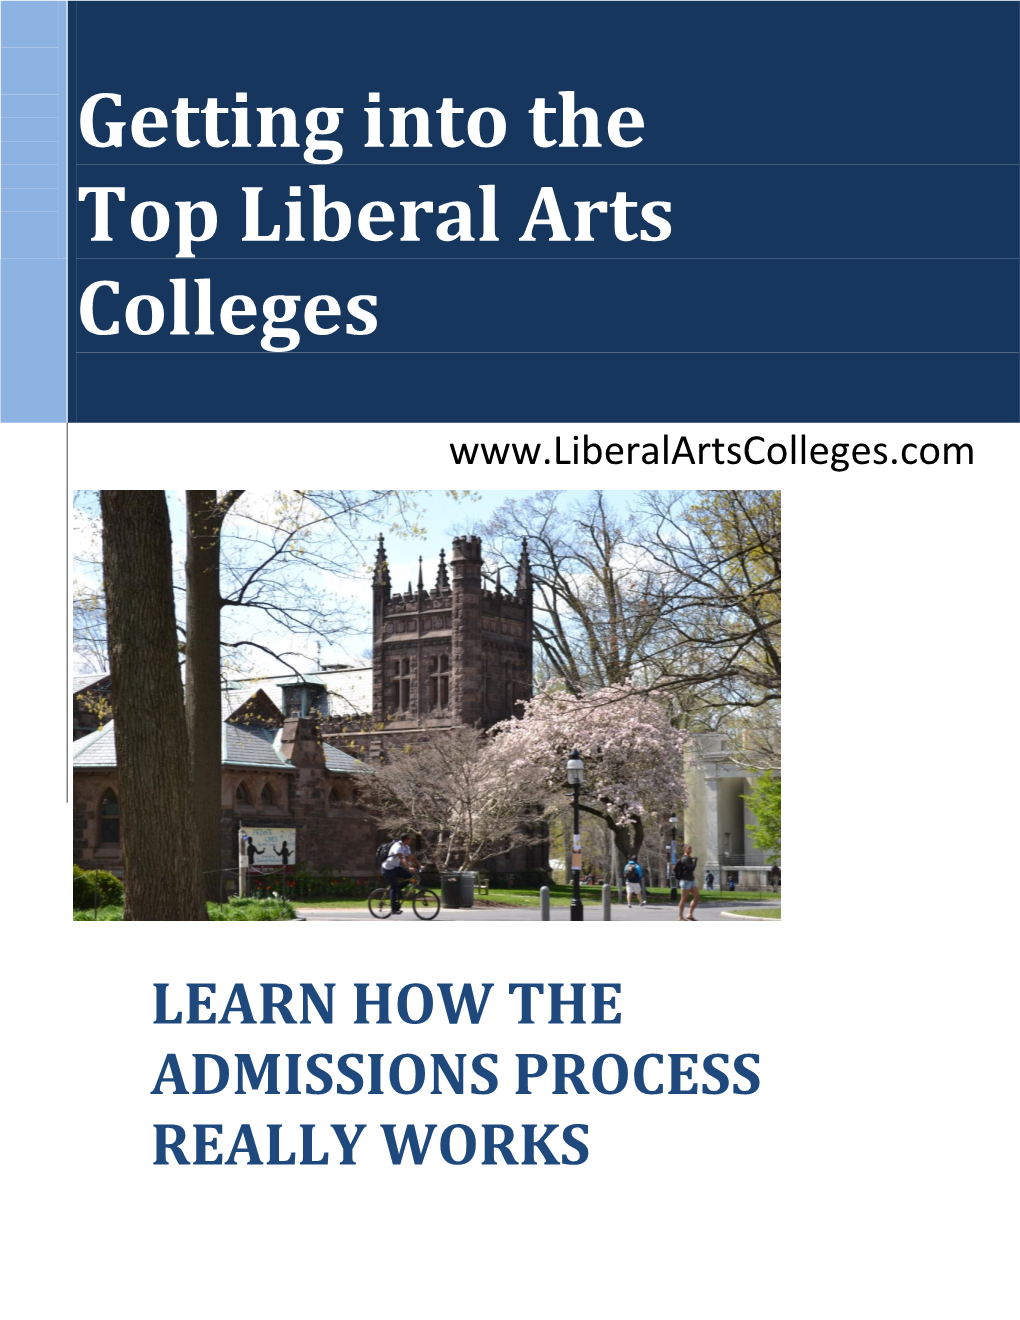 Getting Into the Top Liberal Arts Colleges